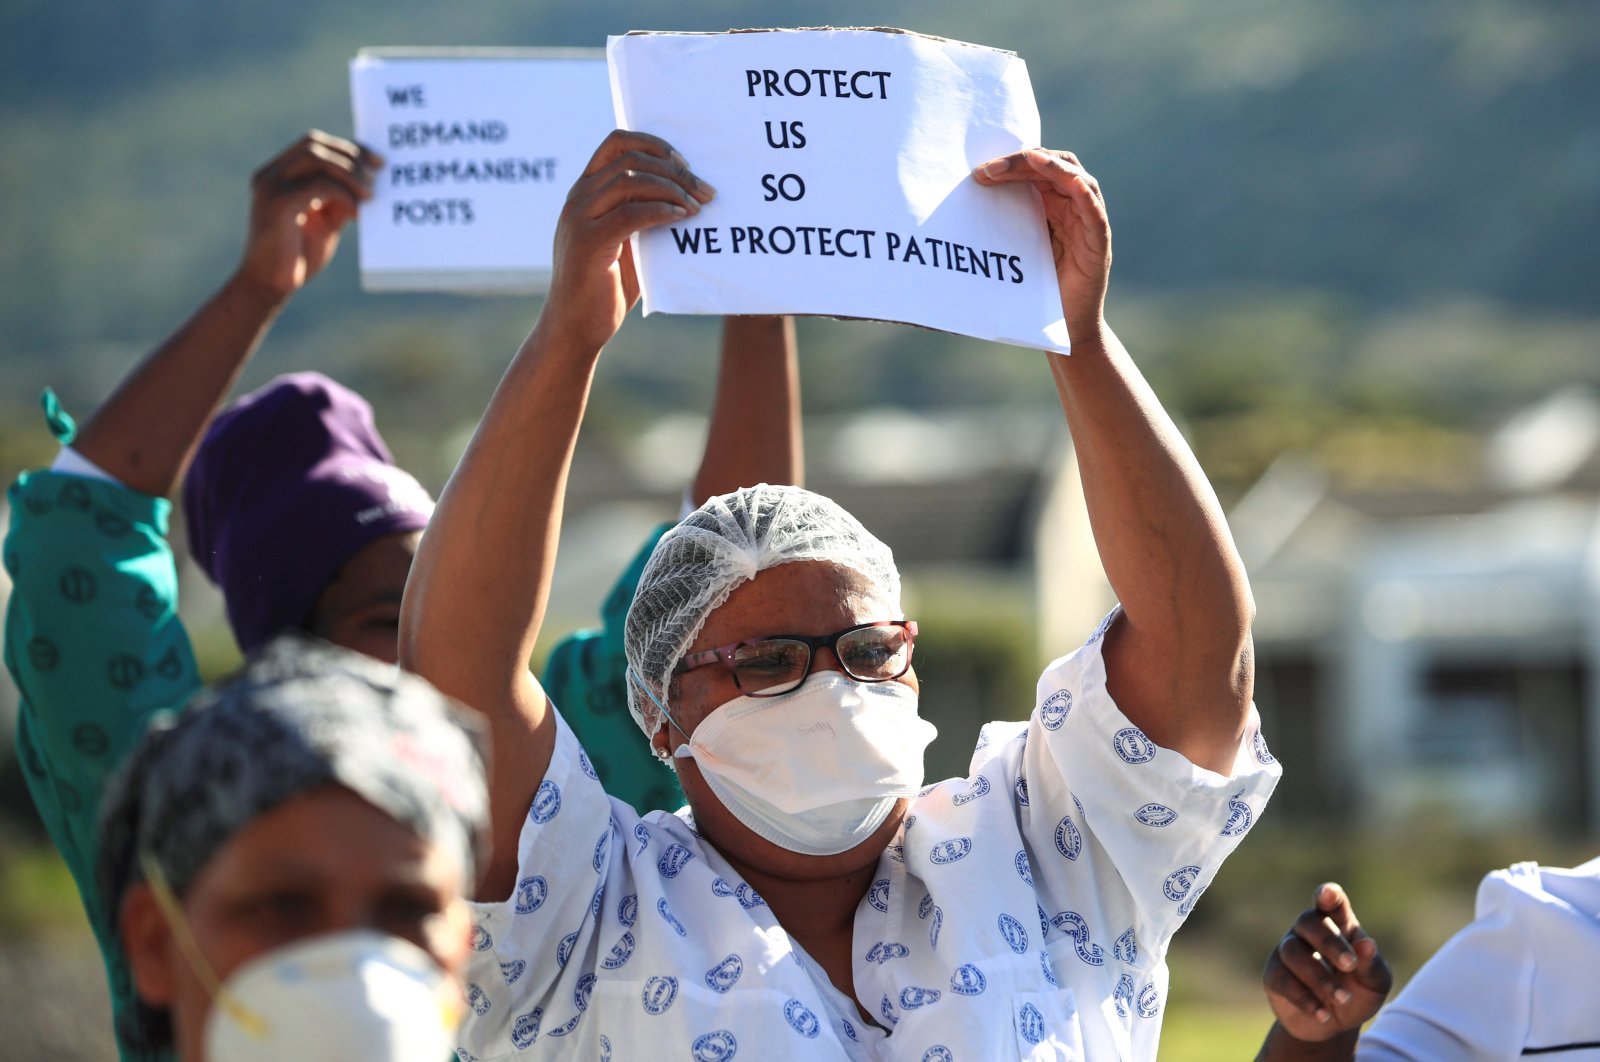 Health care workers protest over the lack of personal protective equipment (PPE) during the coronavirus outbreak outside a hospital, Cape Town, June 19, 2020. (REUTERS Photo)